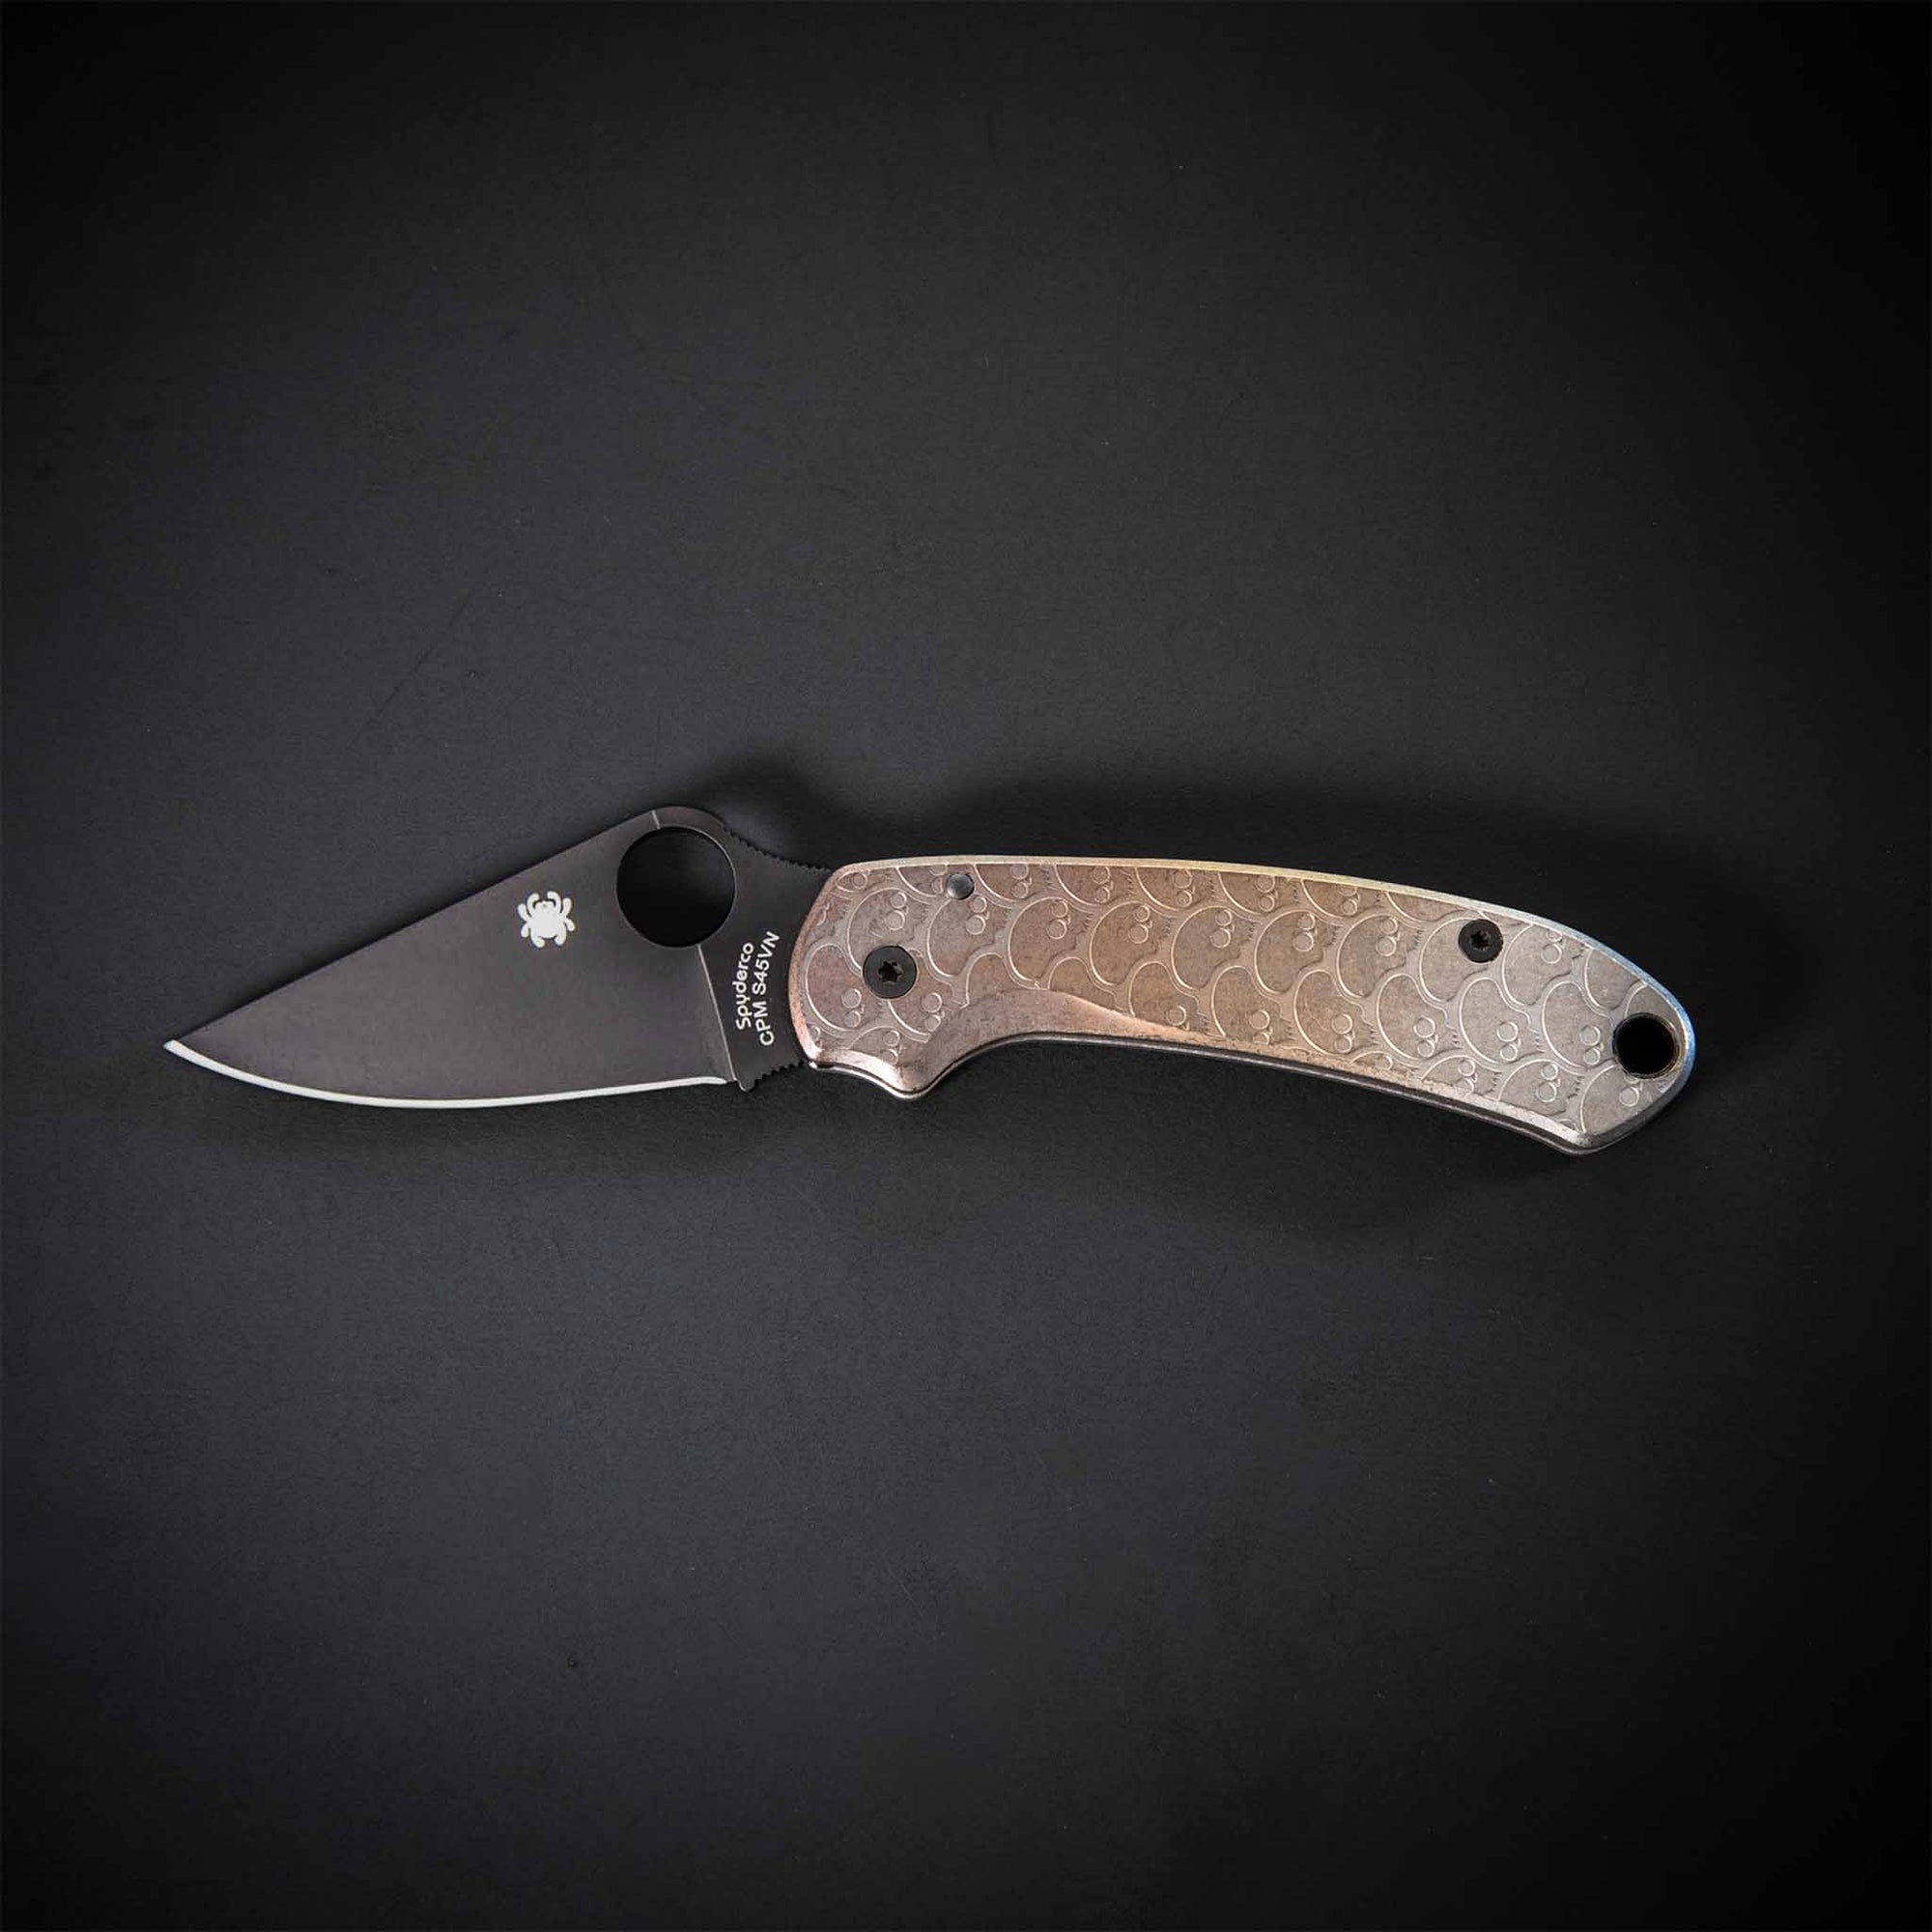 Flytanium X PLAYGE - Warm Fade Ano Titanium Scales for Spyderco Para 3